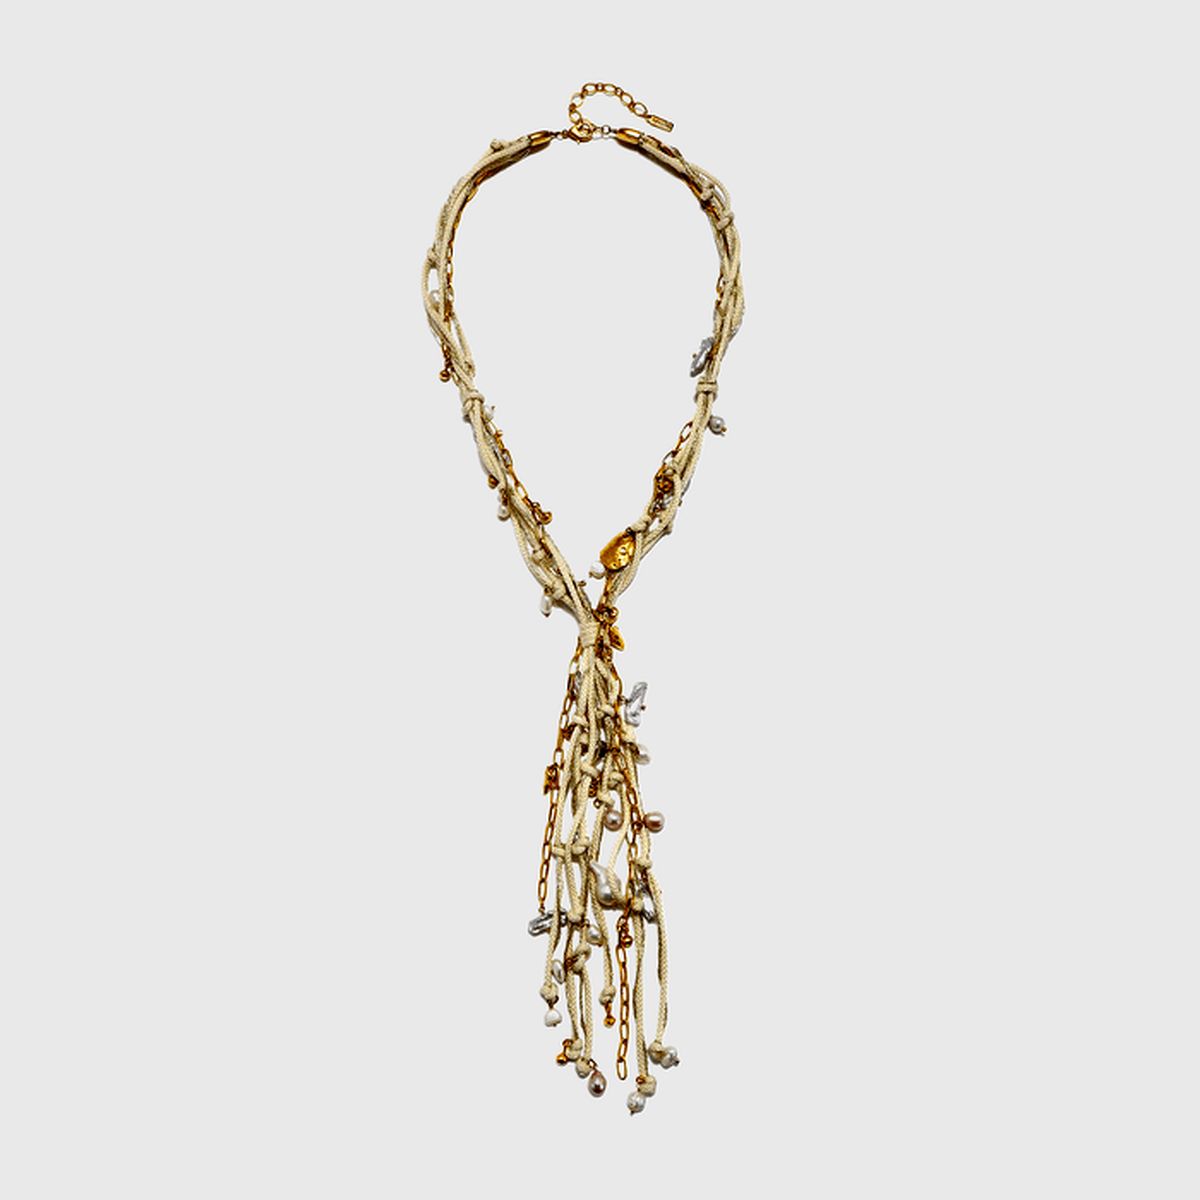 ocean-fragments-rope-and-shell-necklace-ecomm-via-sequin-nyc.com_